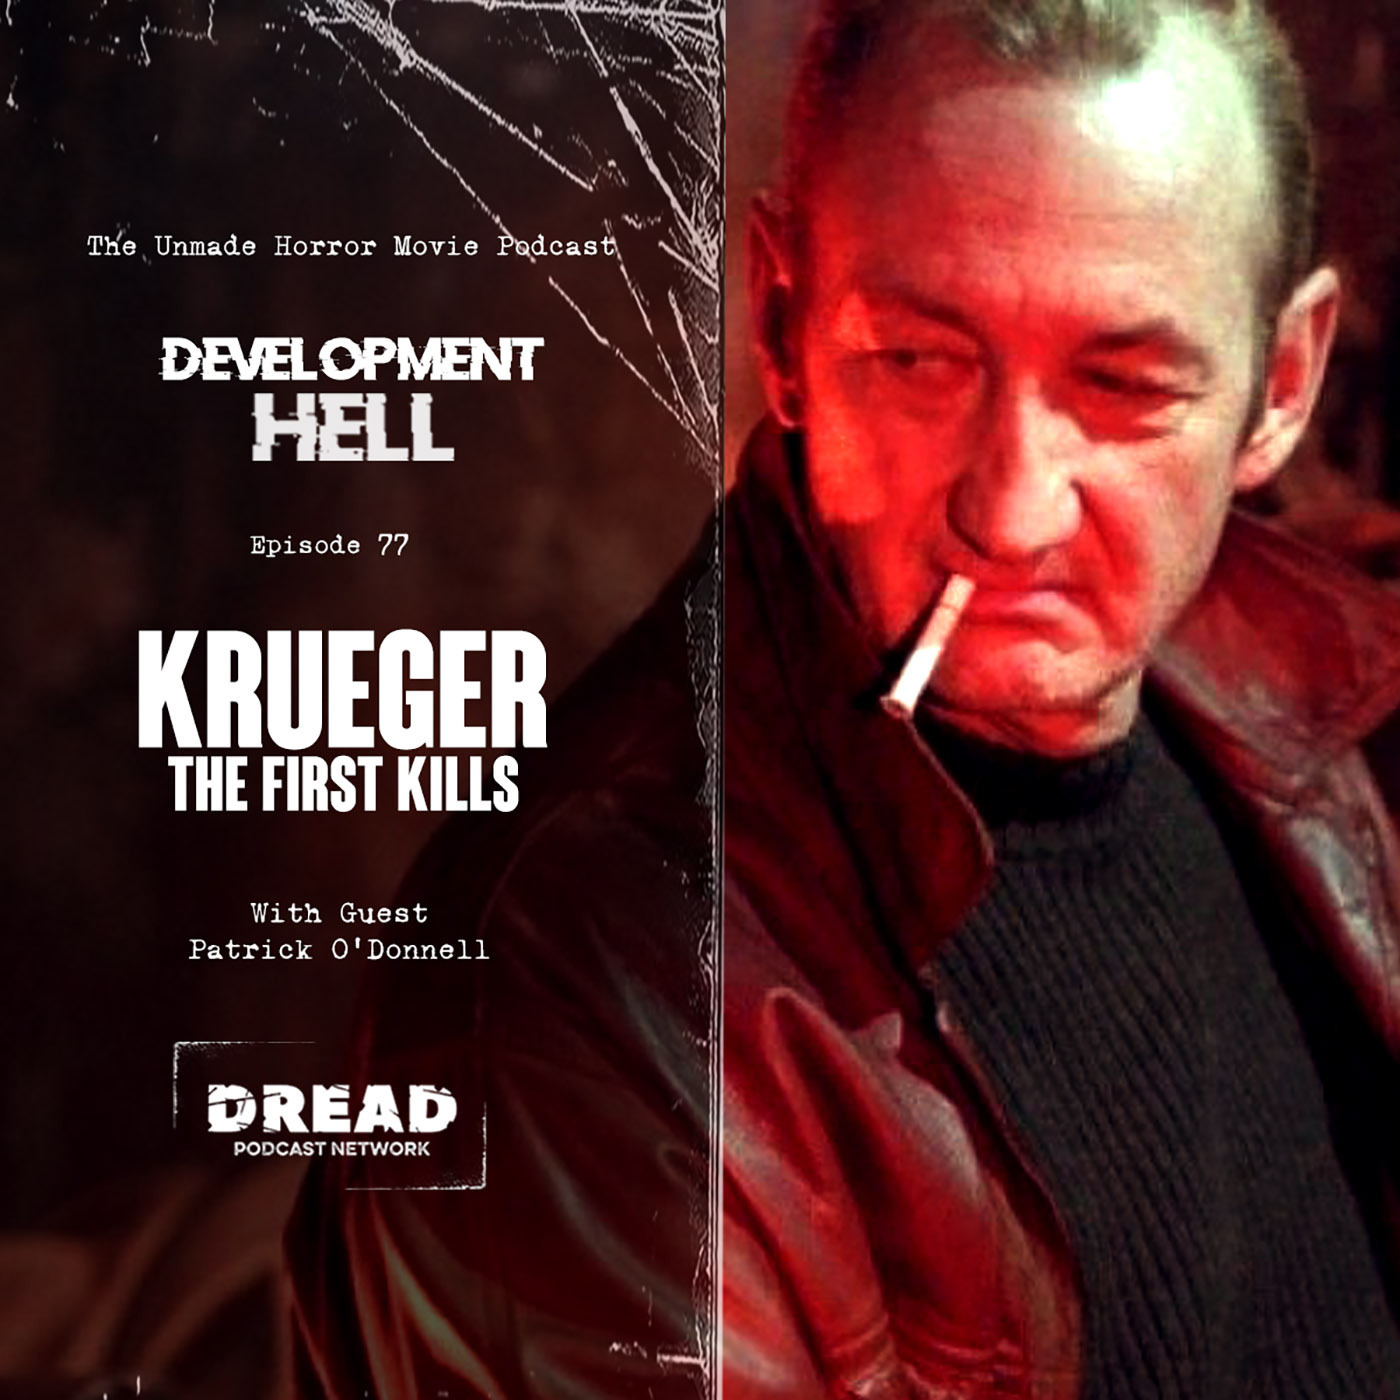 KRUEGER: THE FIRST KILLS (with Patrick O'Donnell)